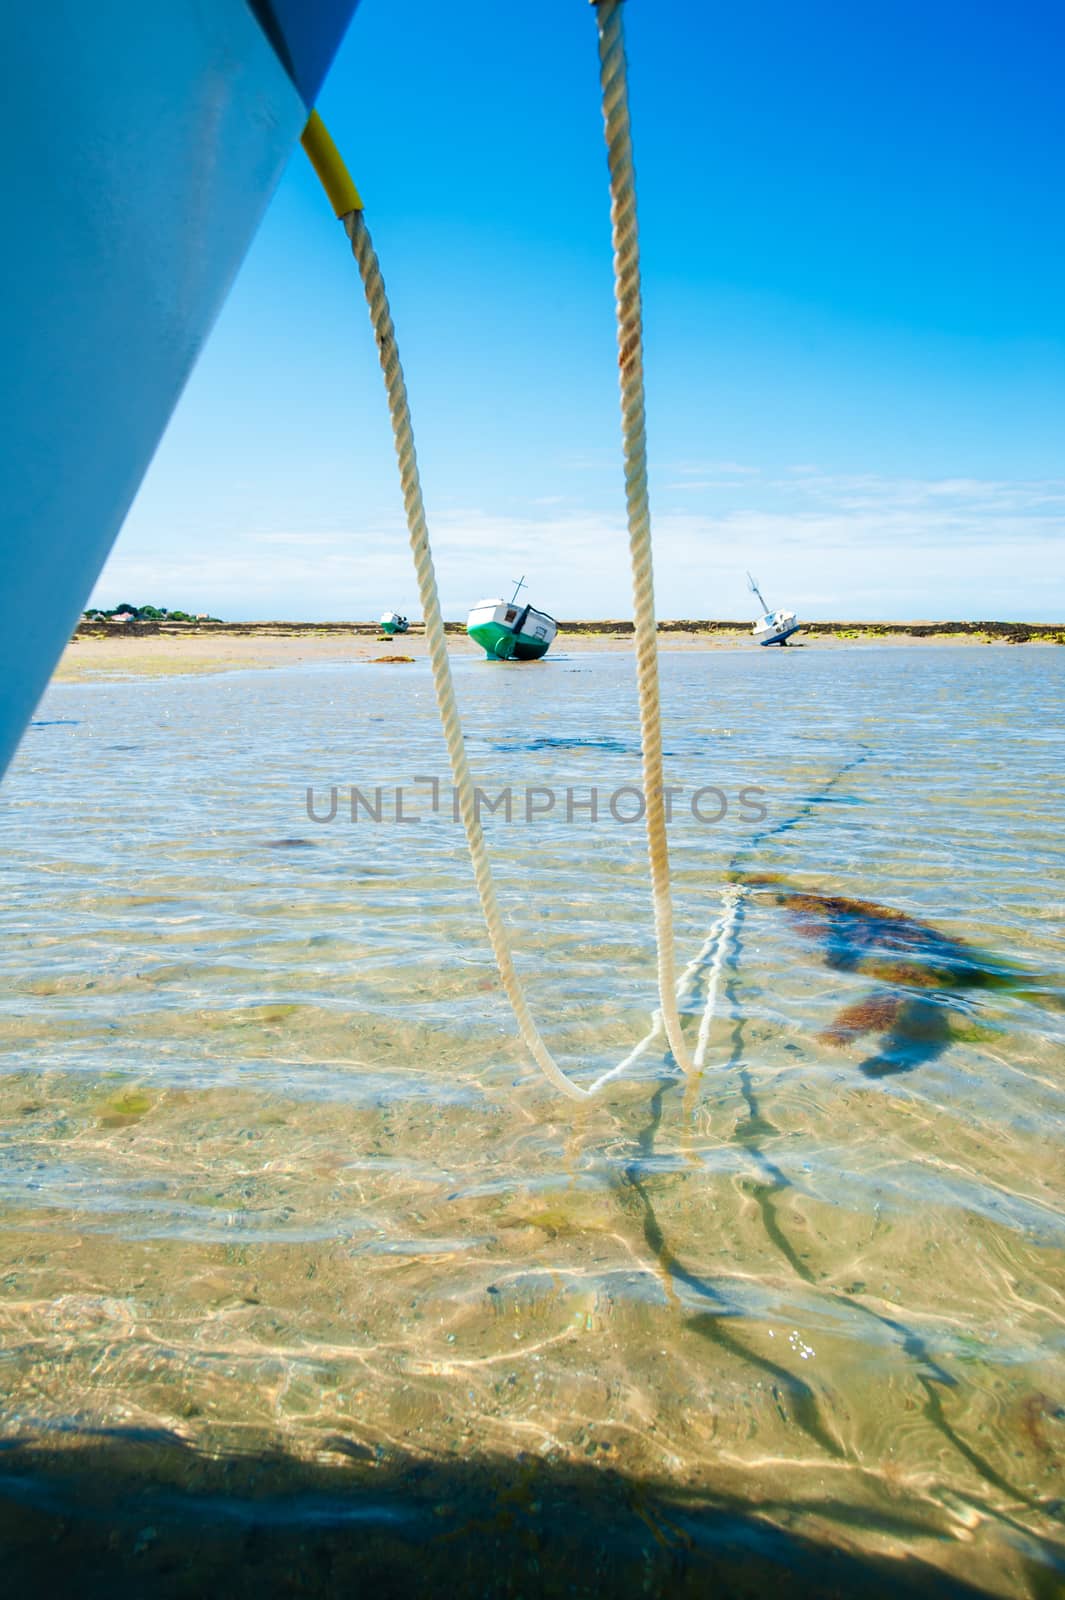 view on a boat between the anchor line of another boat which are anchored on the beach